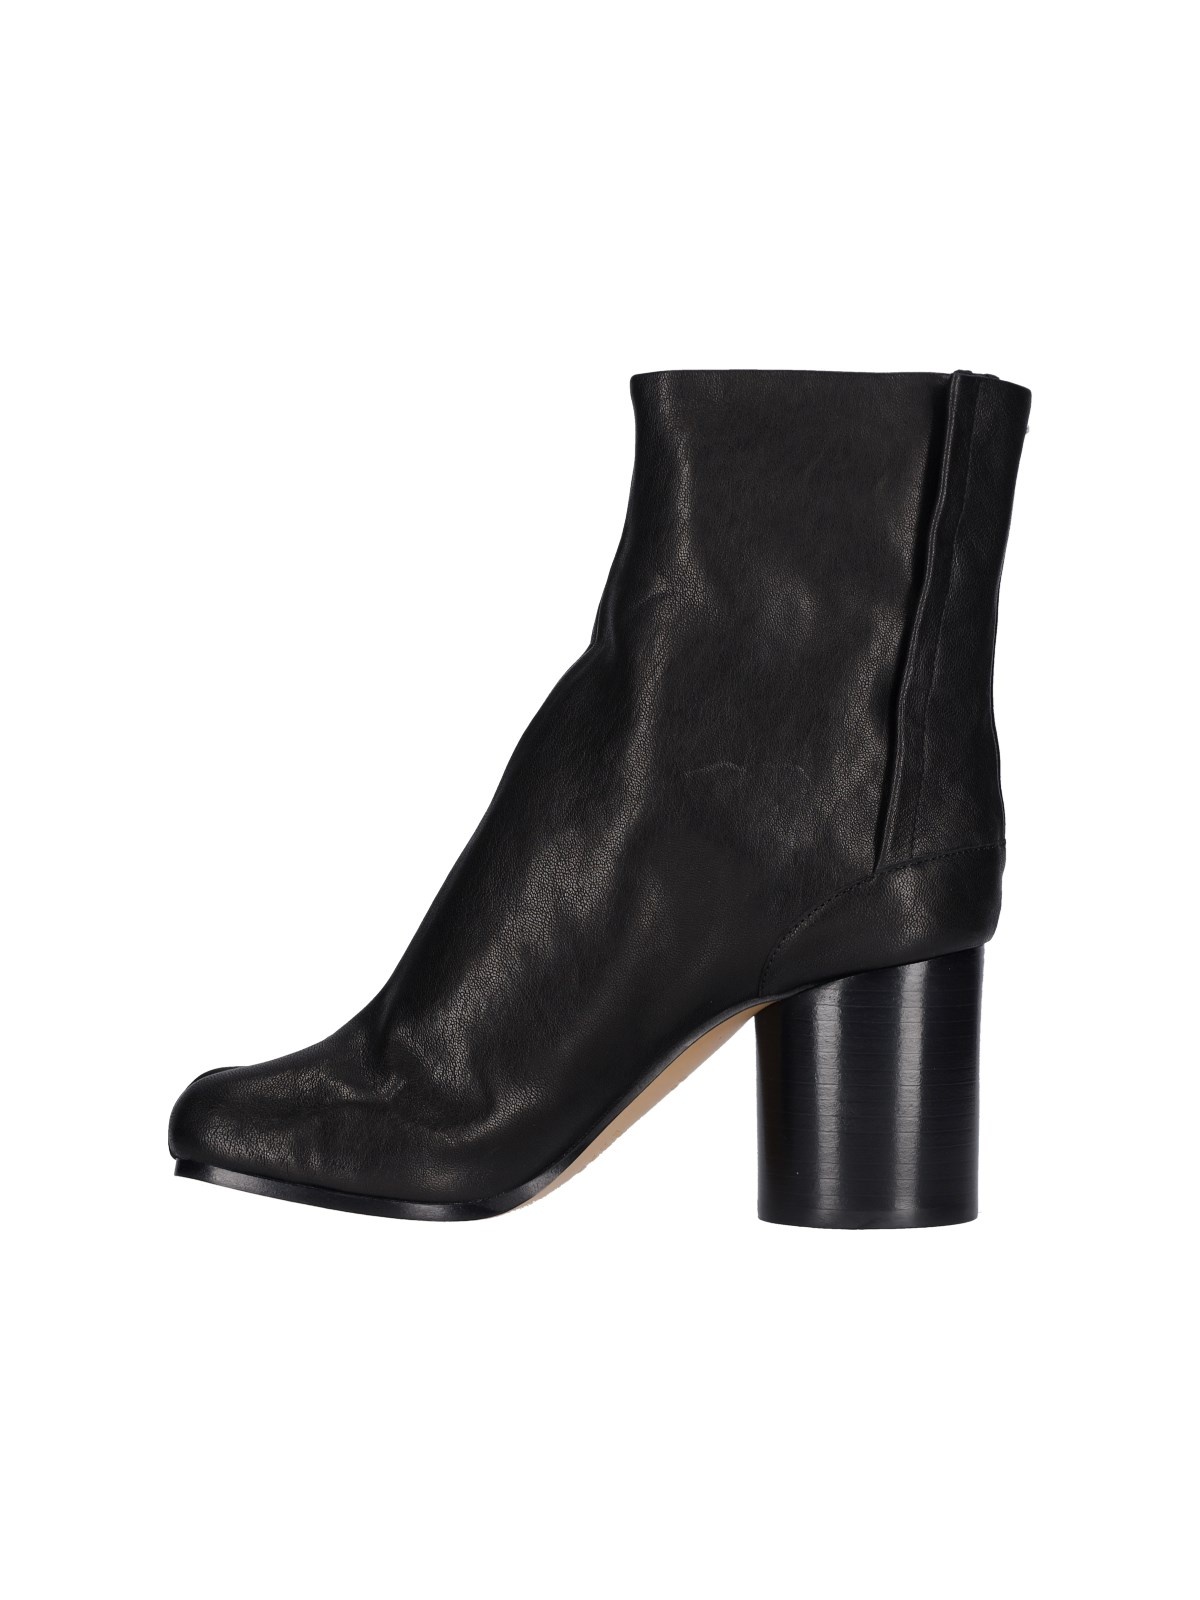 'TABI' ANKLE BOOTS - 3